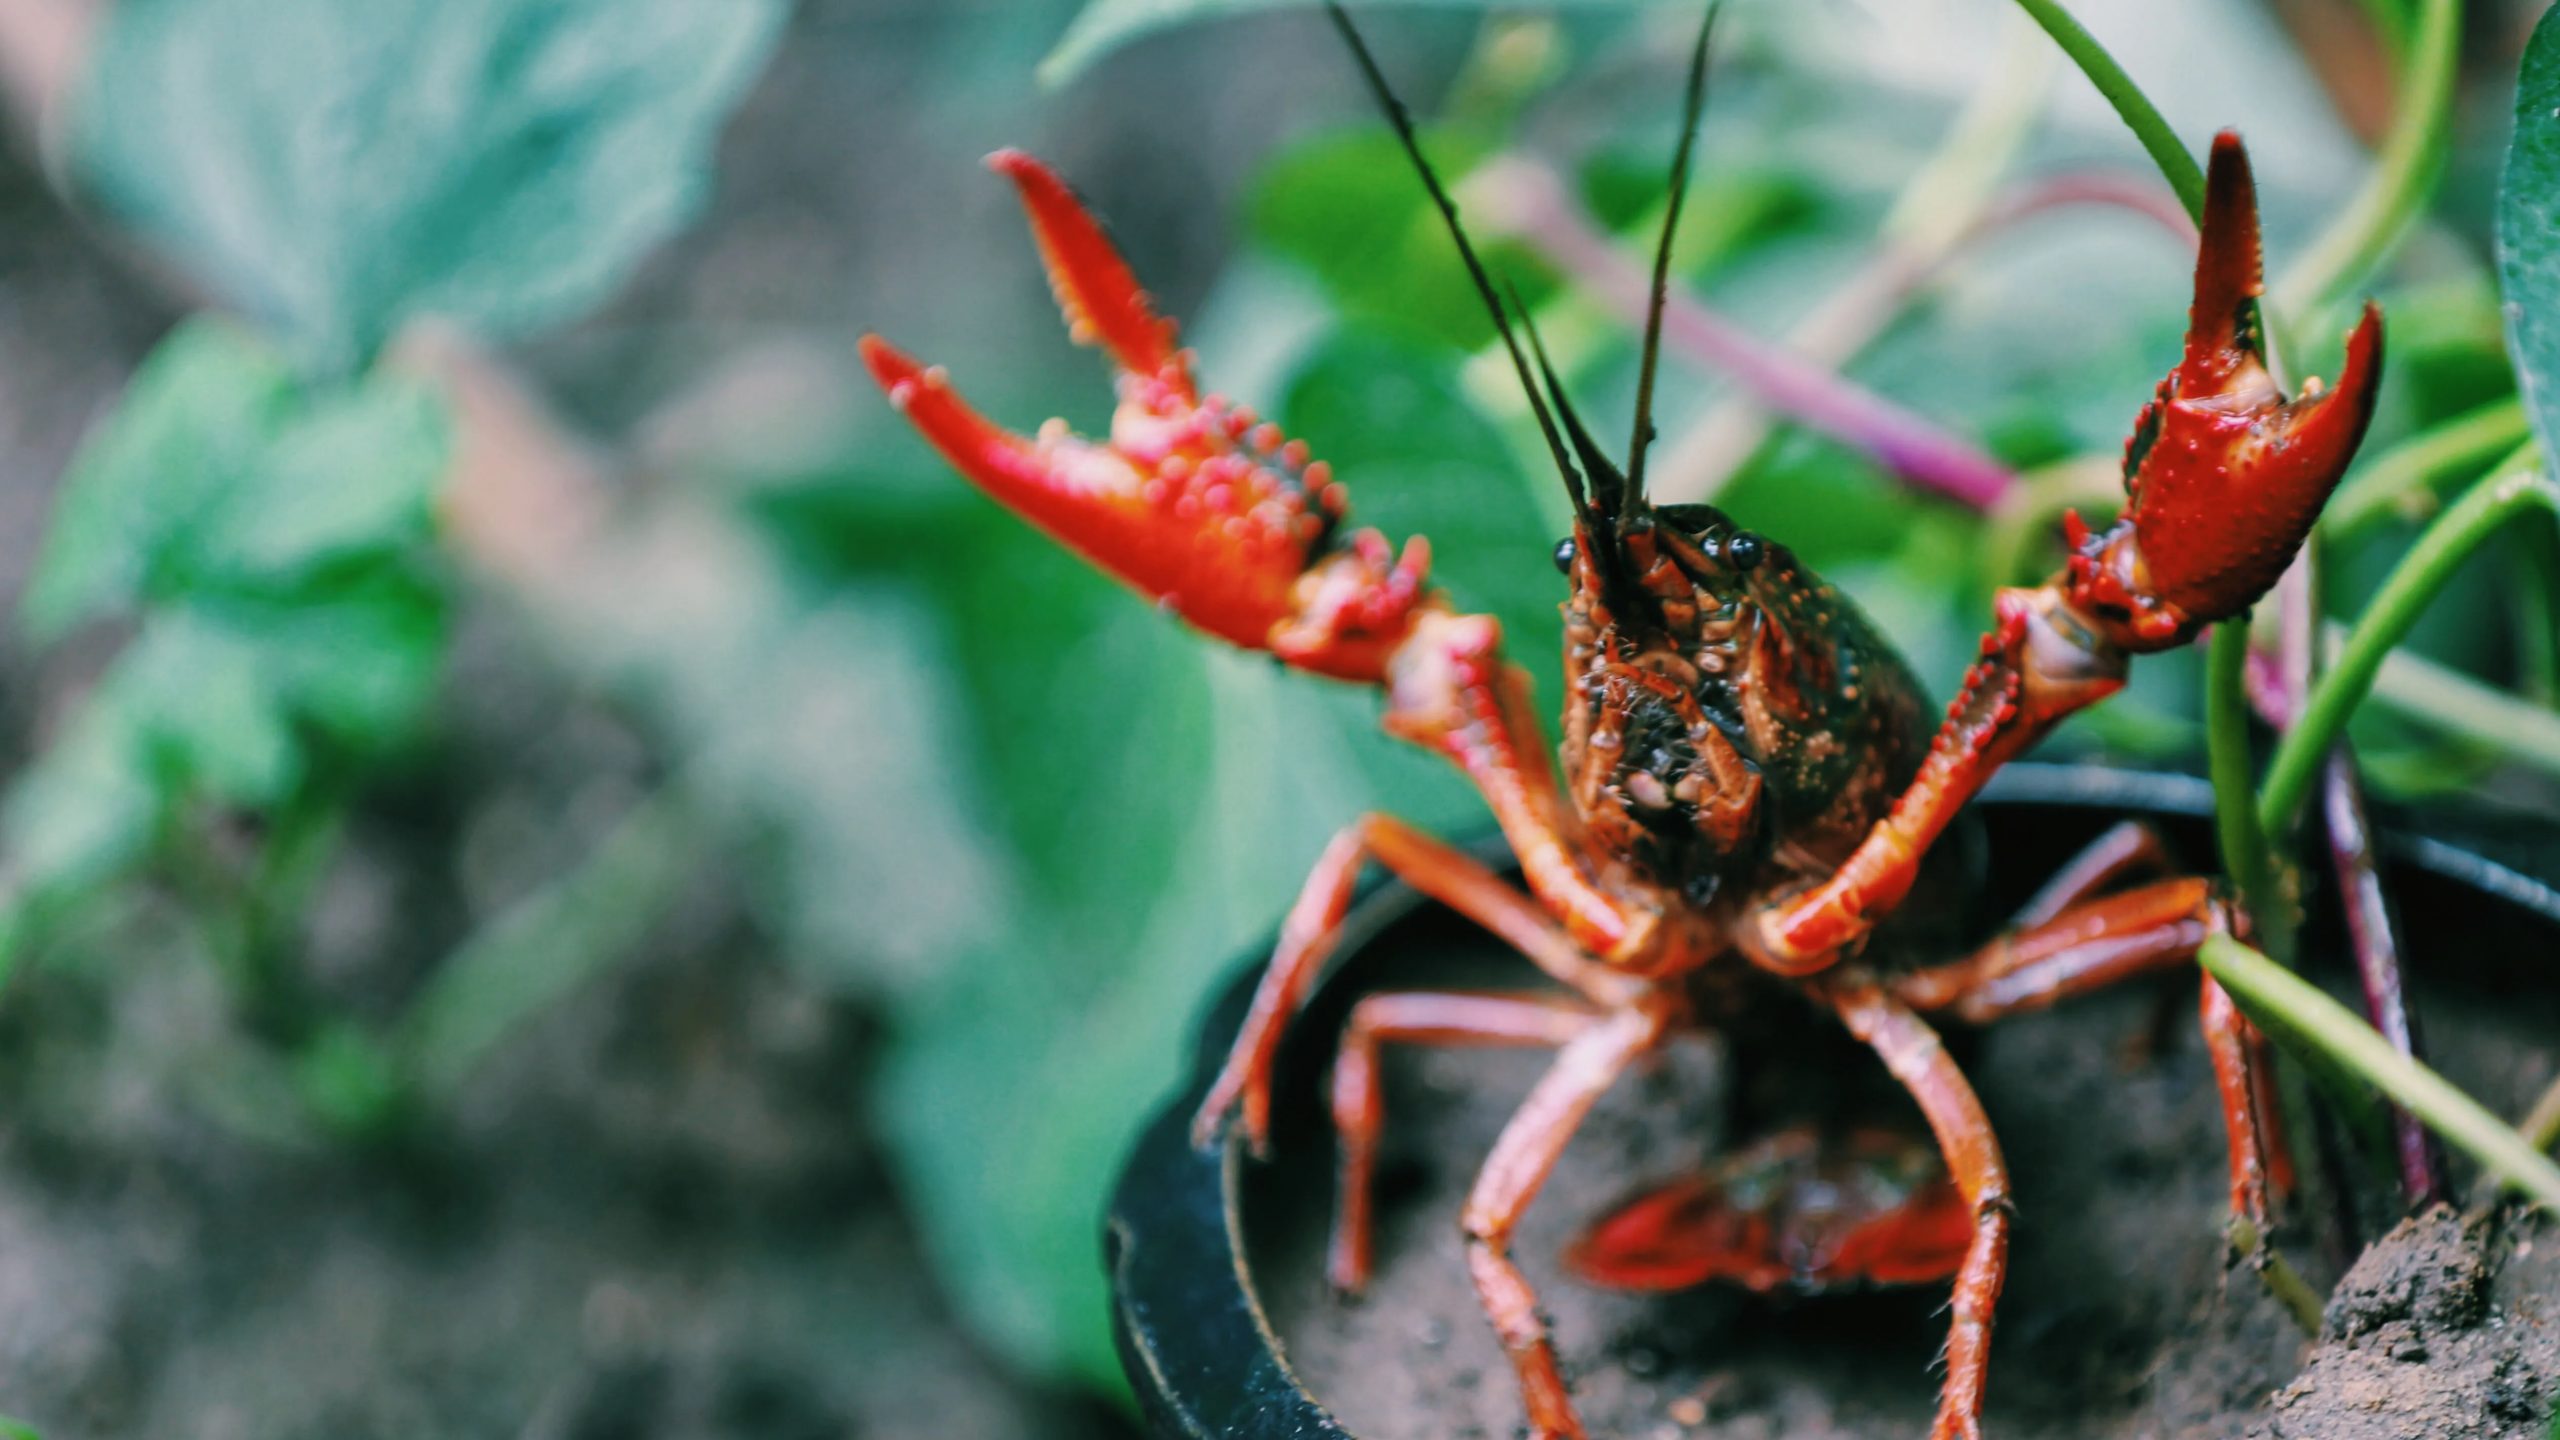 Crayfish take more risks while on antidepressants, study shows